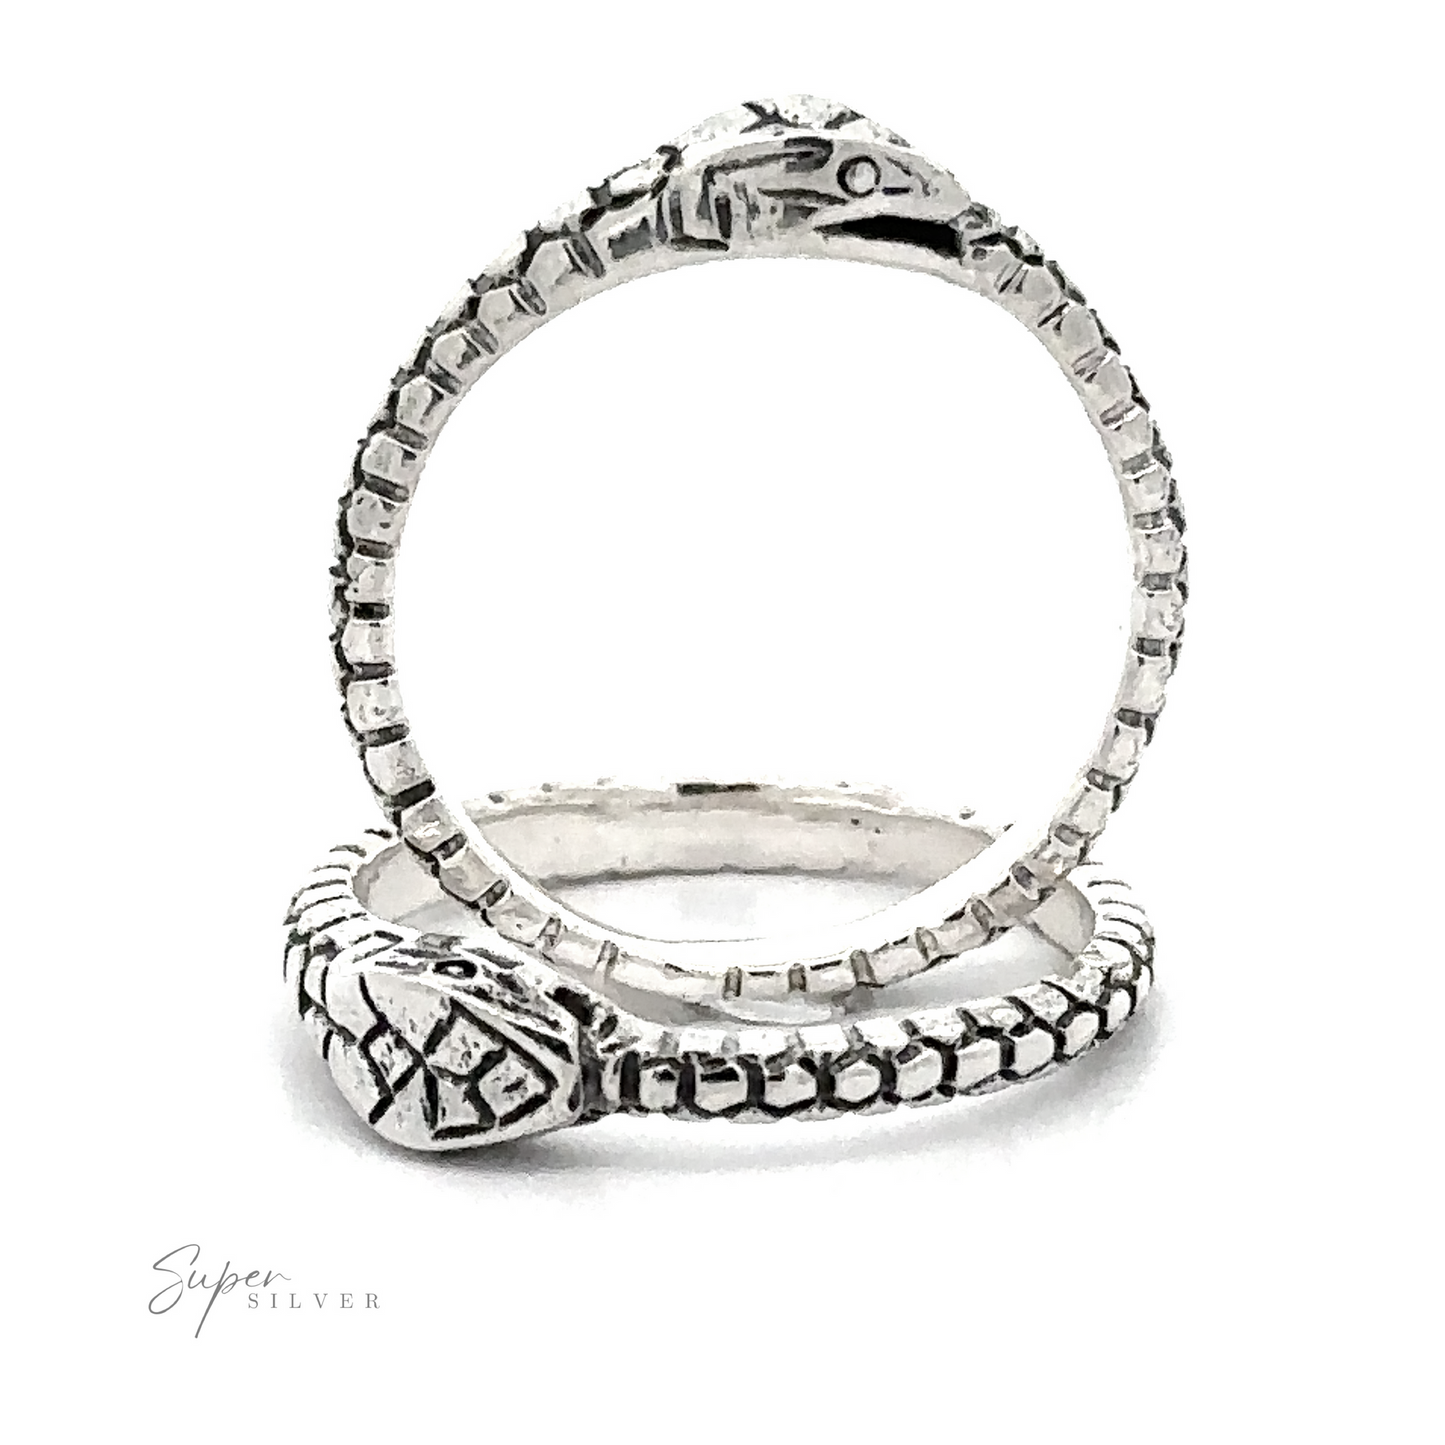 A Ouroboros Ring featuring intricate tribal patterns along the band, displayed on a white background with a visible logo reading "super silver.